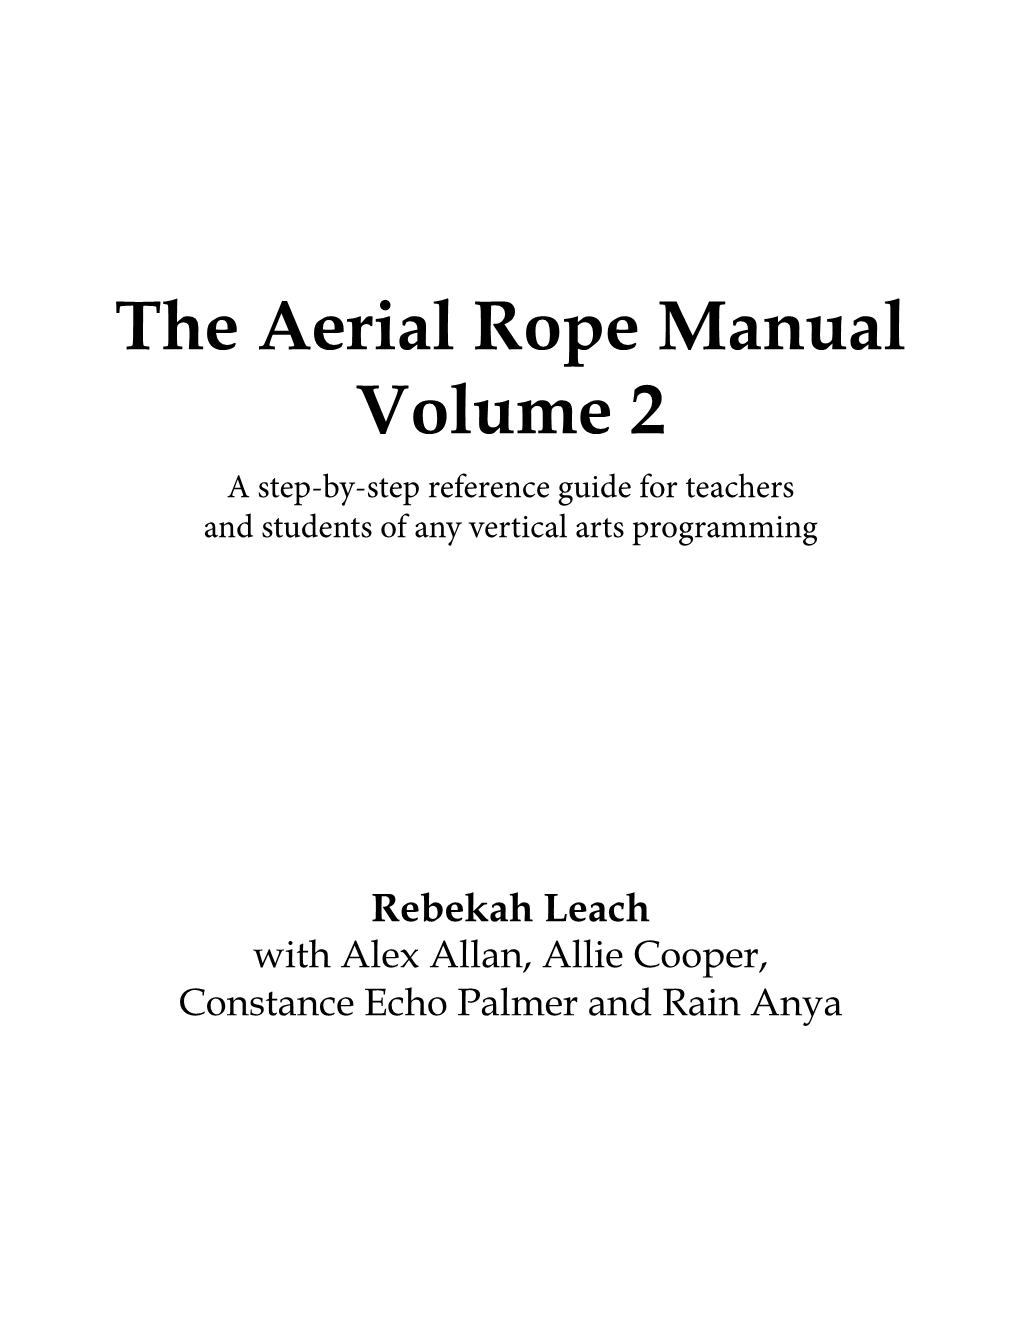 The Aerial Rope Manual Volume 2 a Step-By-Step Reference Guide for Teachers and Students of Any Vertical Arts Programming